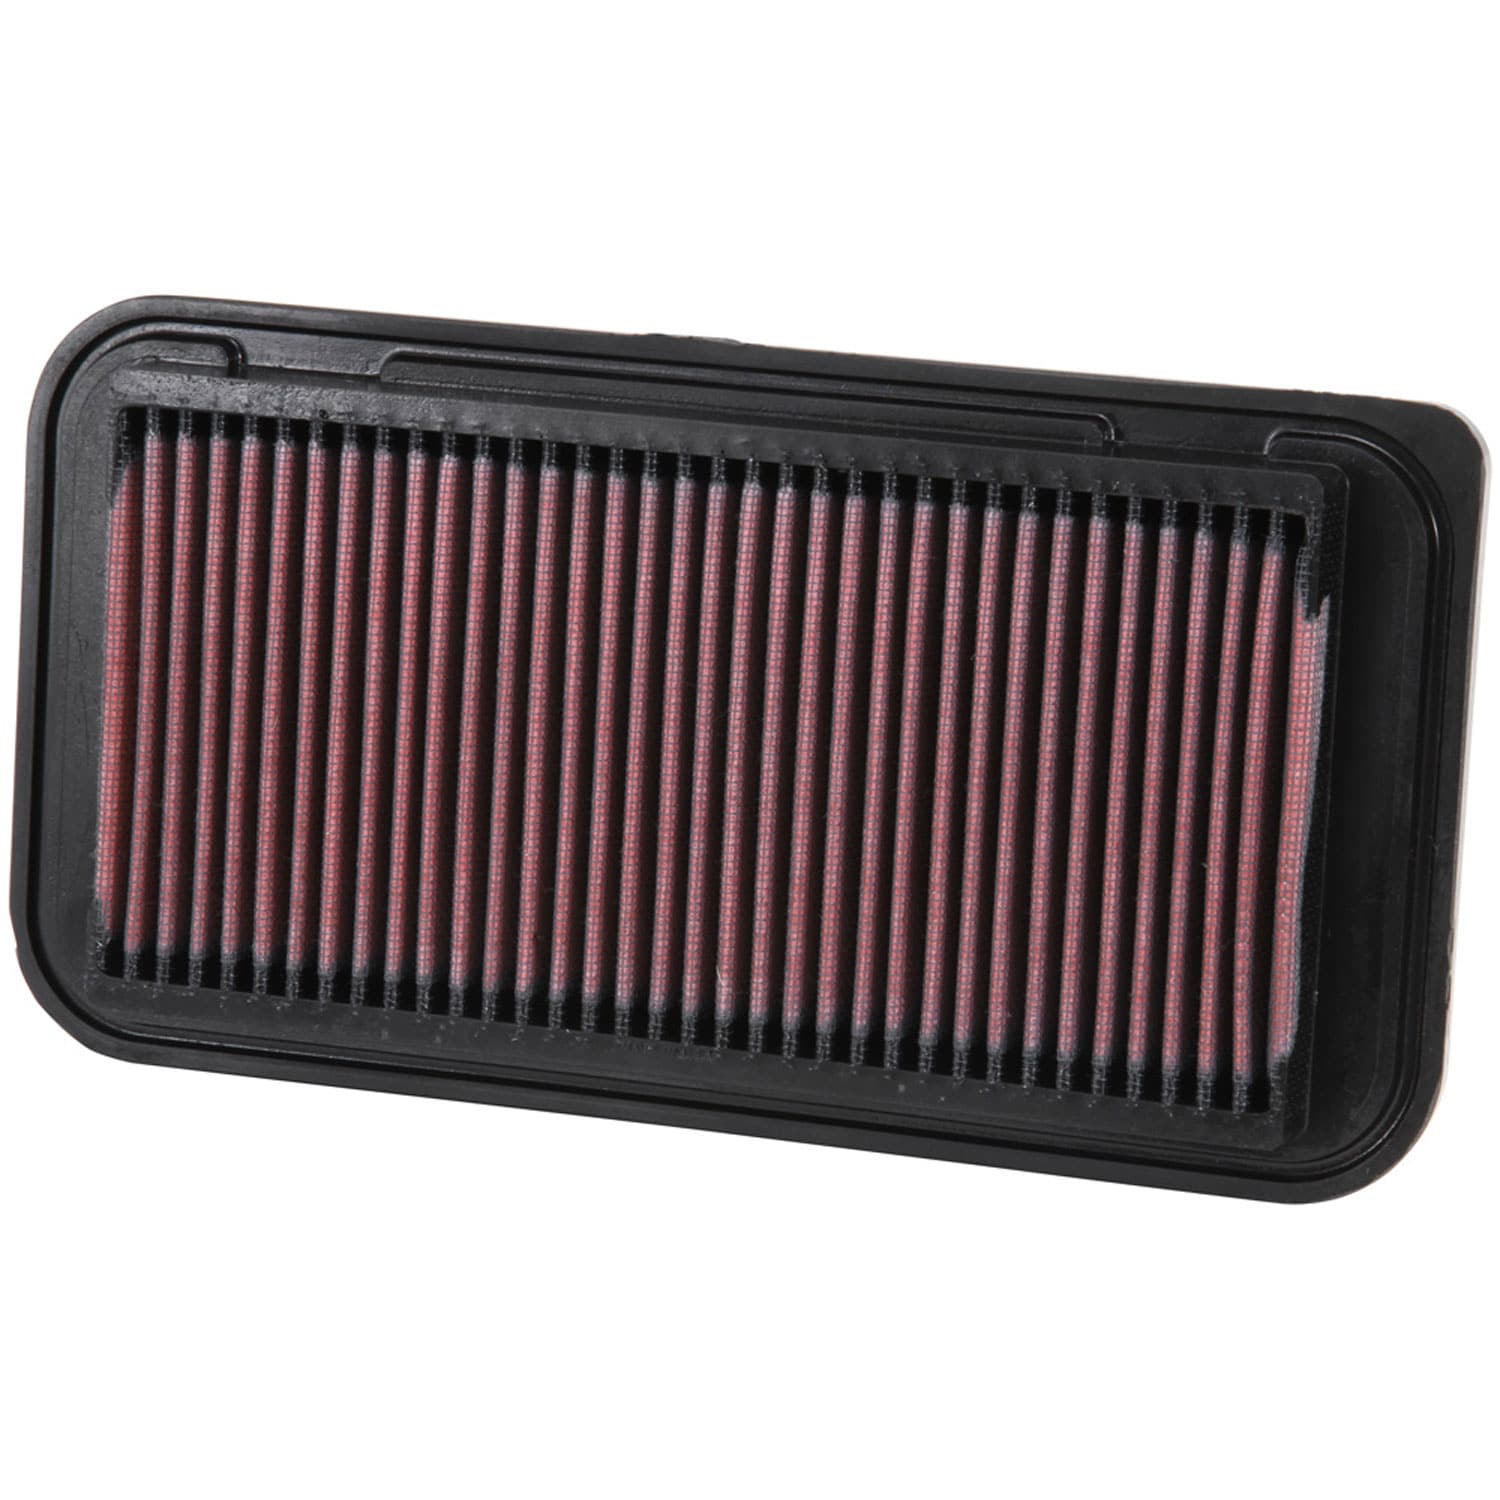 K&N K&N Engine Air Filter: High Performance, Premium, Washable, Replacement Filter: 2000-2017 Toyota/Lotus/Great Wall/Scion (Isis, Avensis, Ipsum, Verso, Corolla, Caldina, other select models), 33-2252